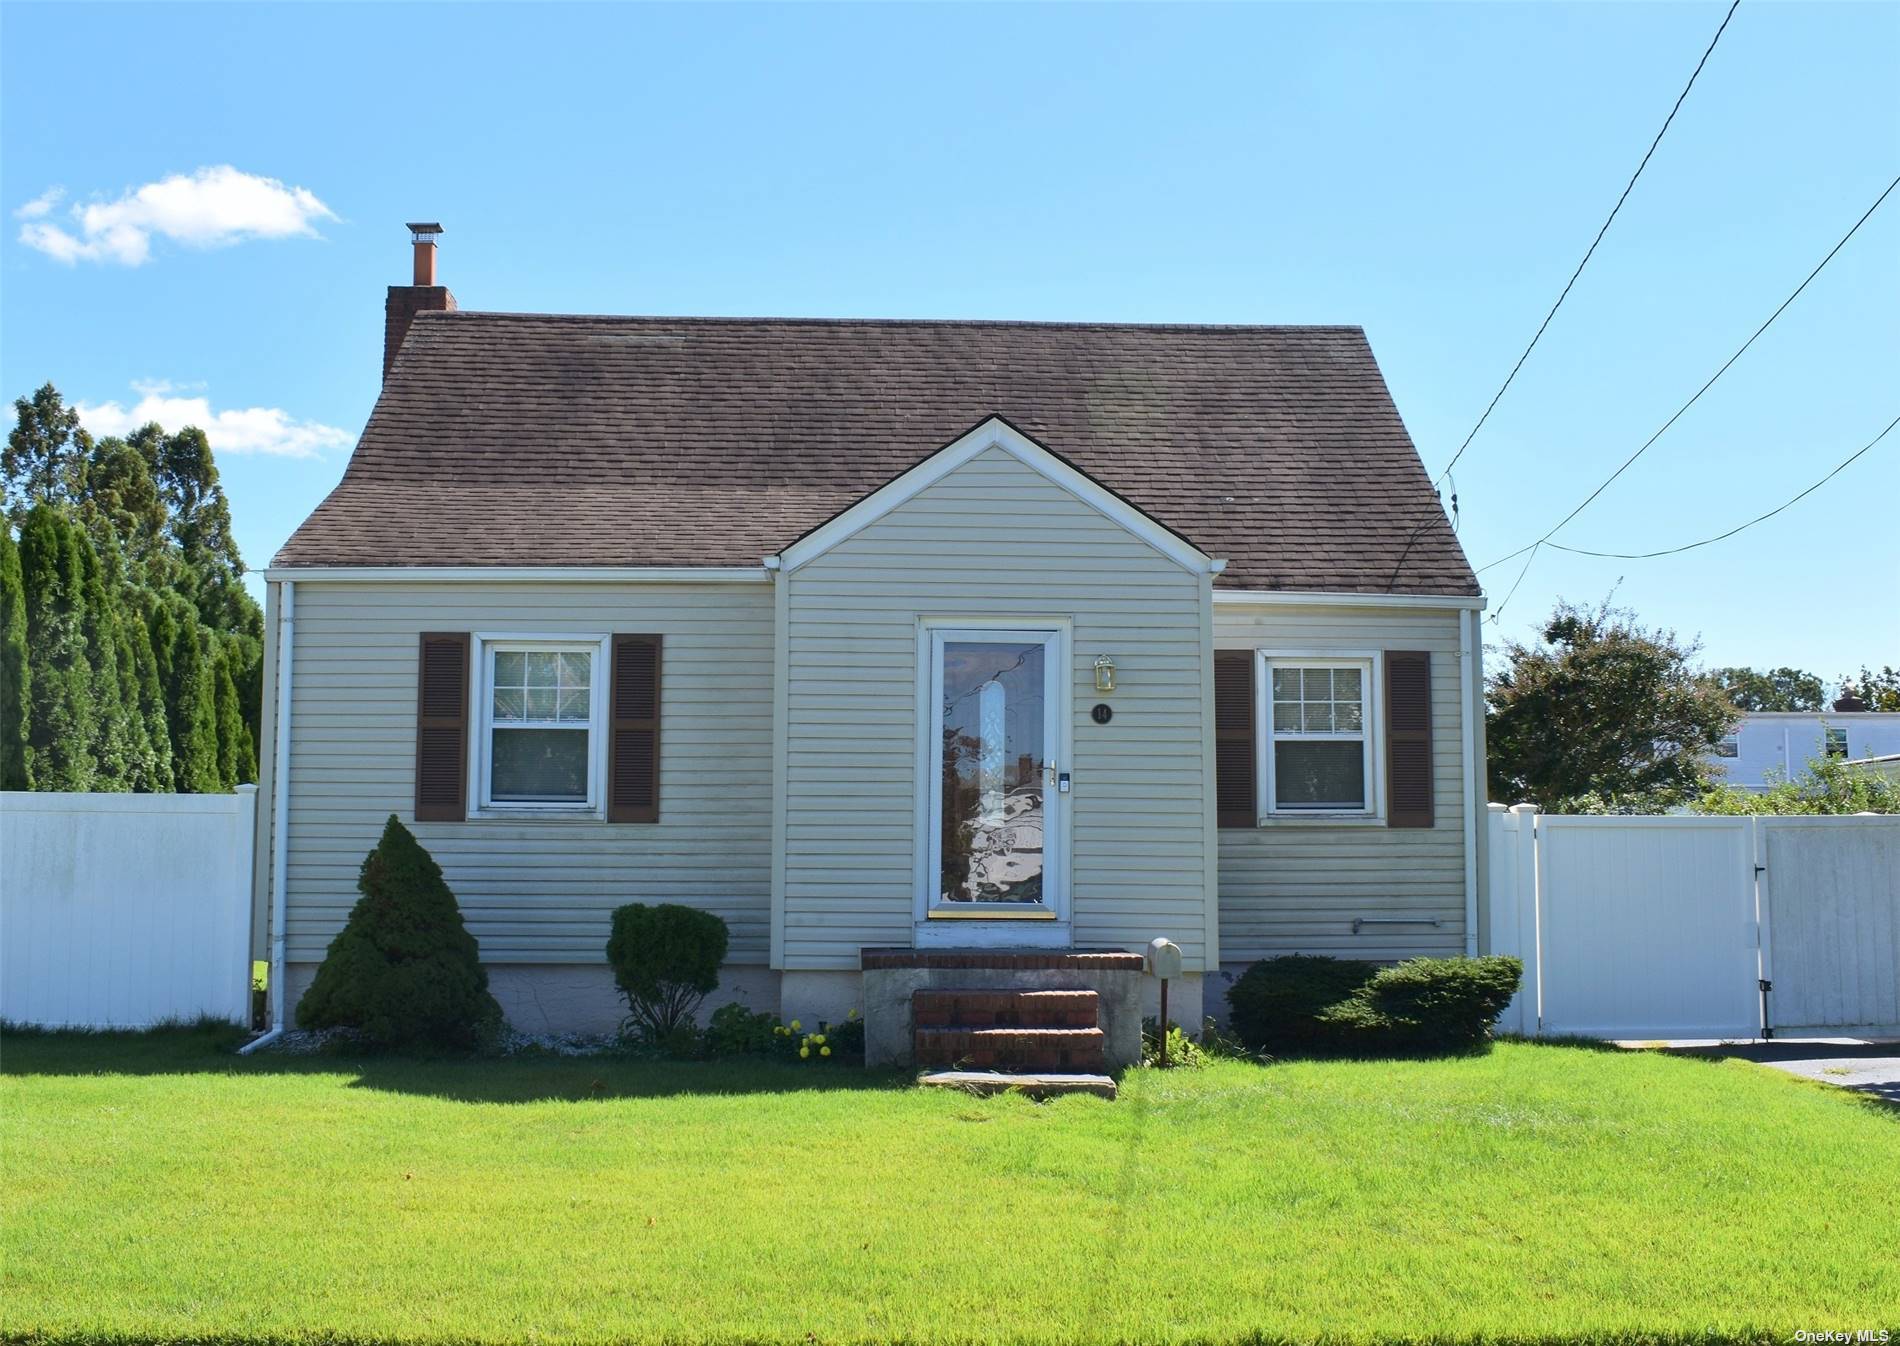 Pride in ownership shows in this beautiful 3 Bedroom Cape Cod style home.